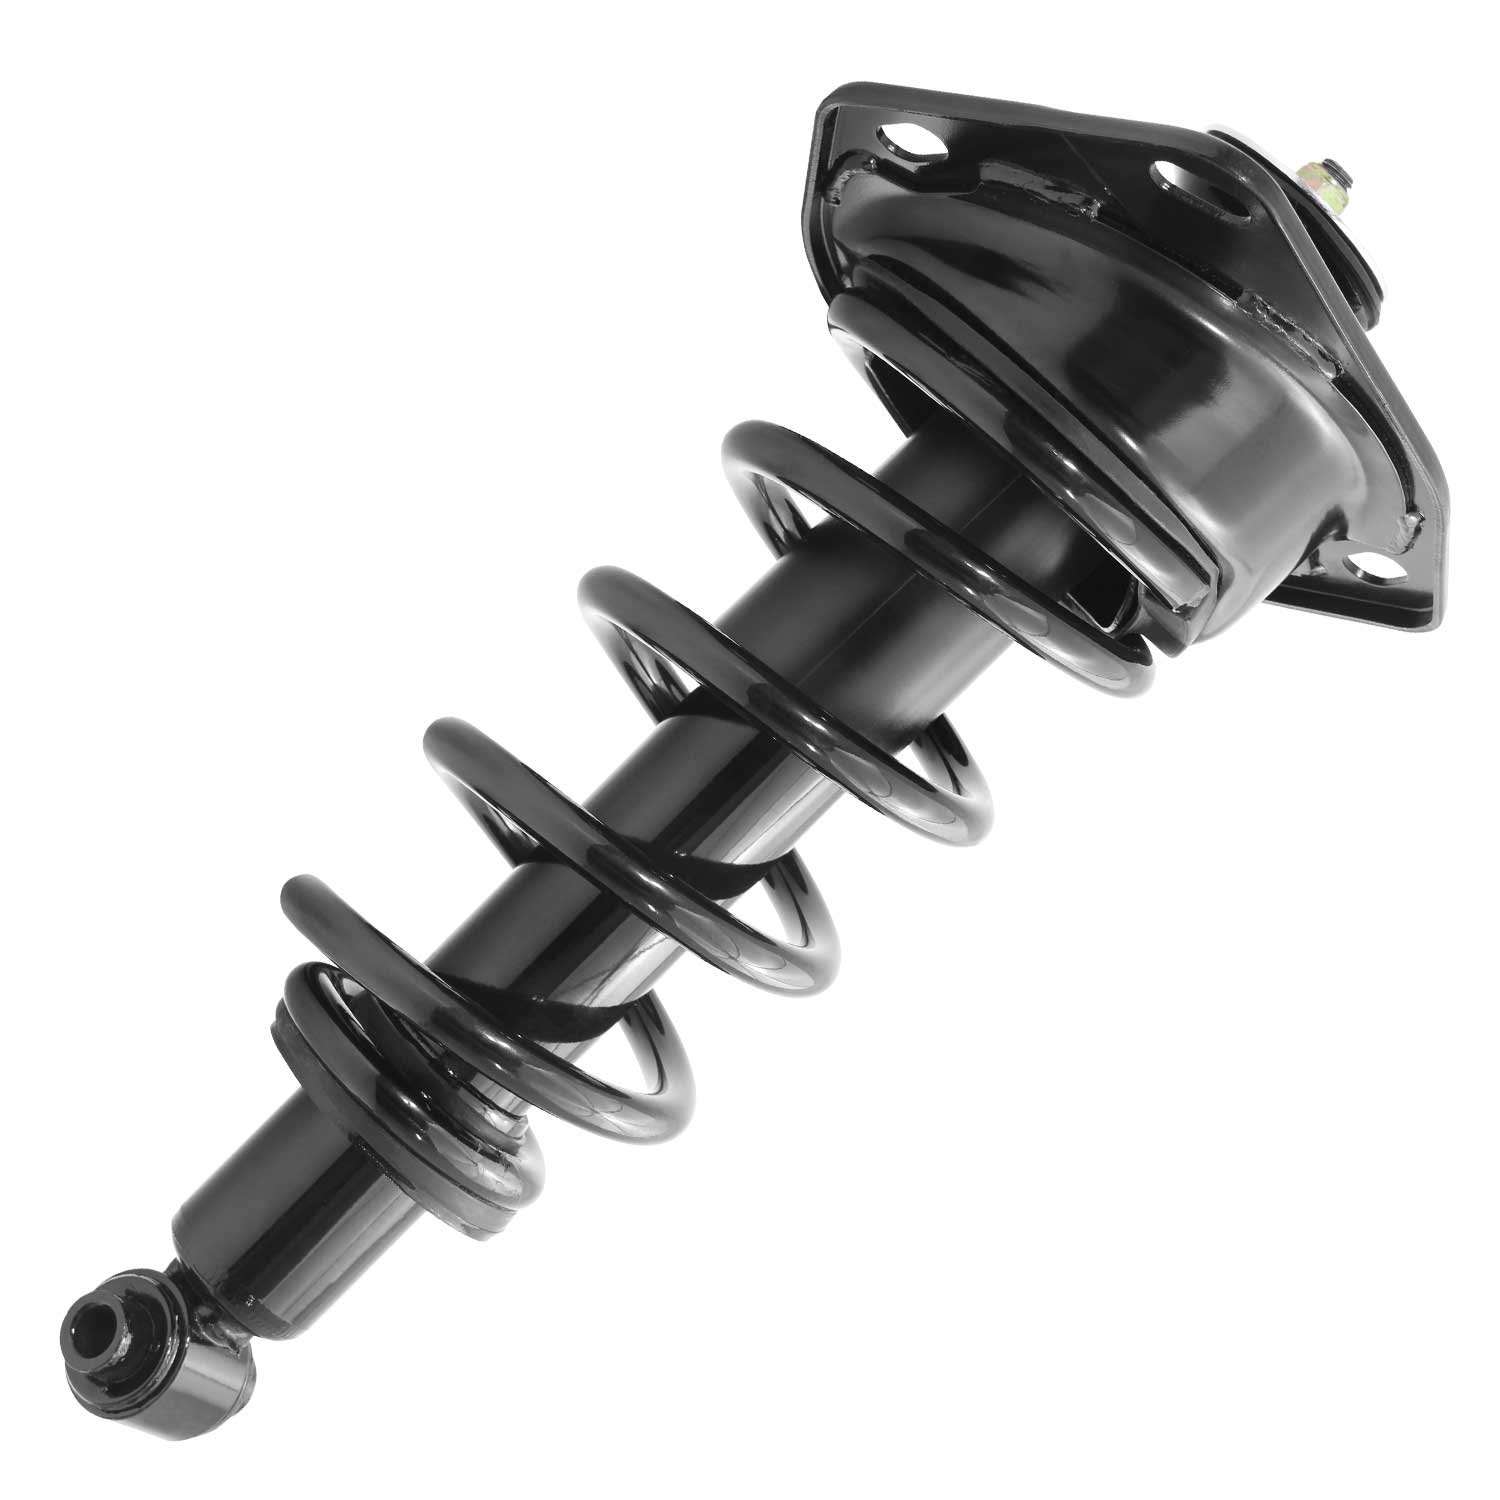 15202 Suspension Strut & Coil Spring Assembly Fits Select Chevy Camaro